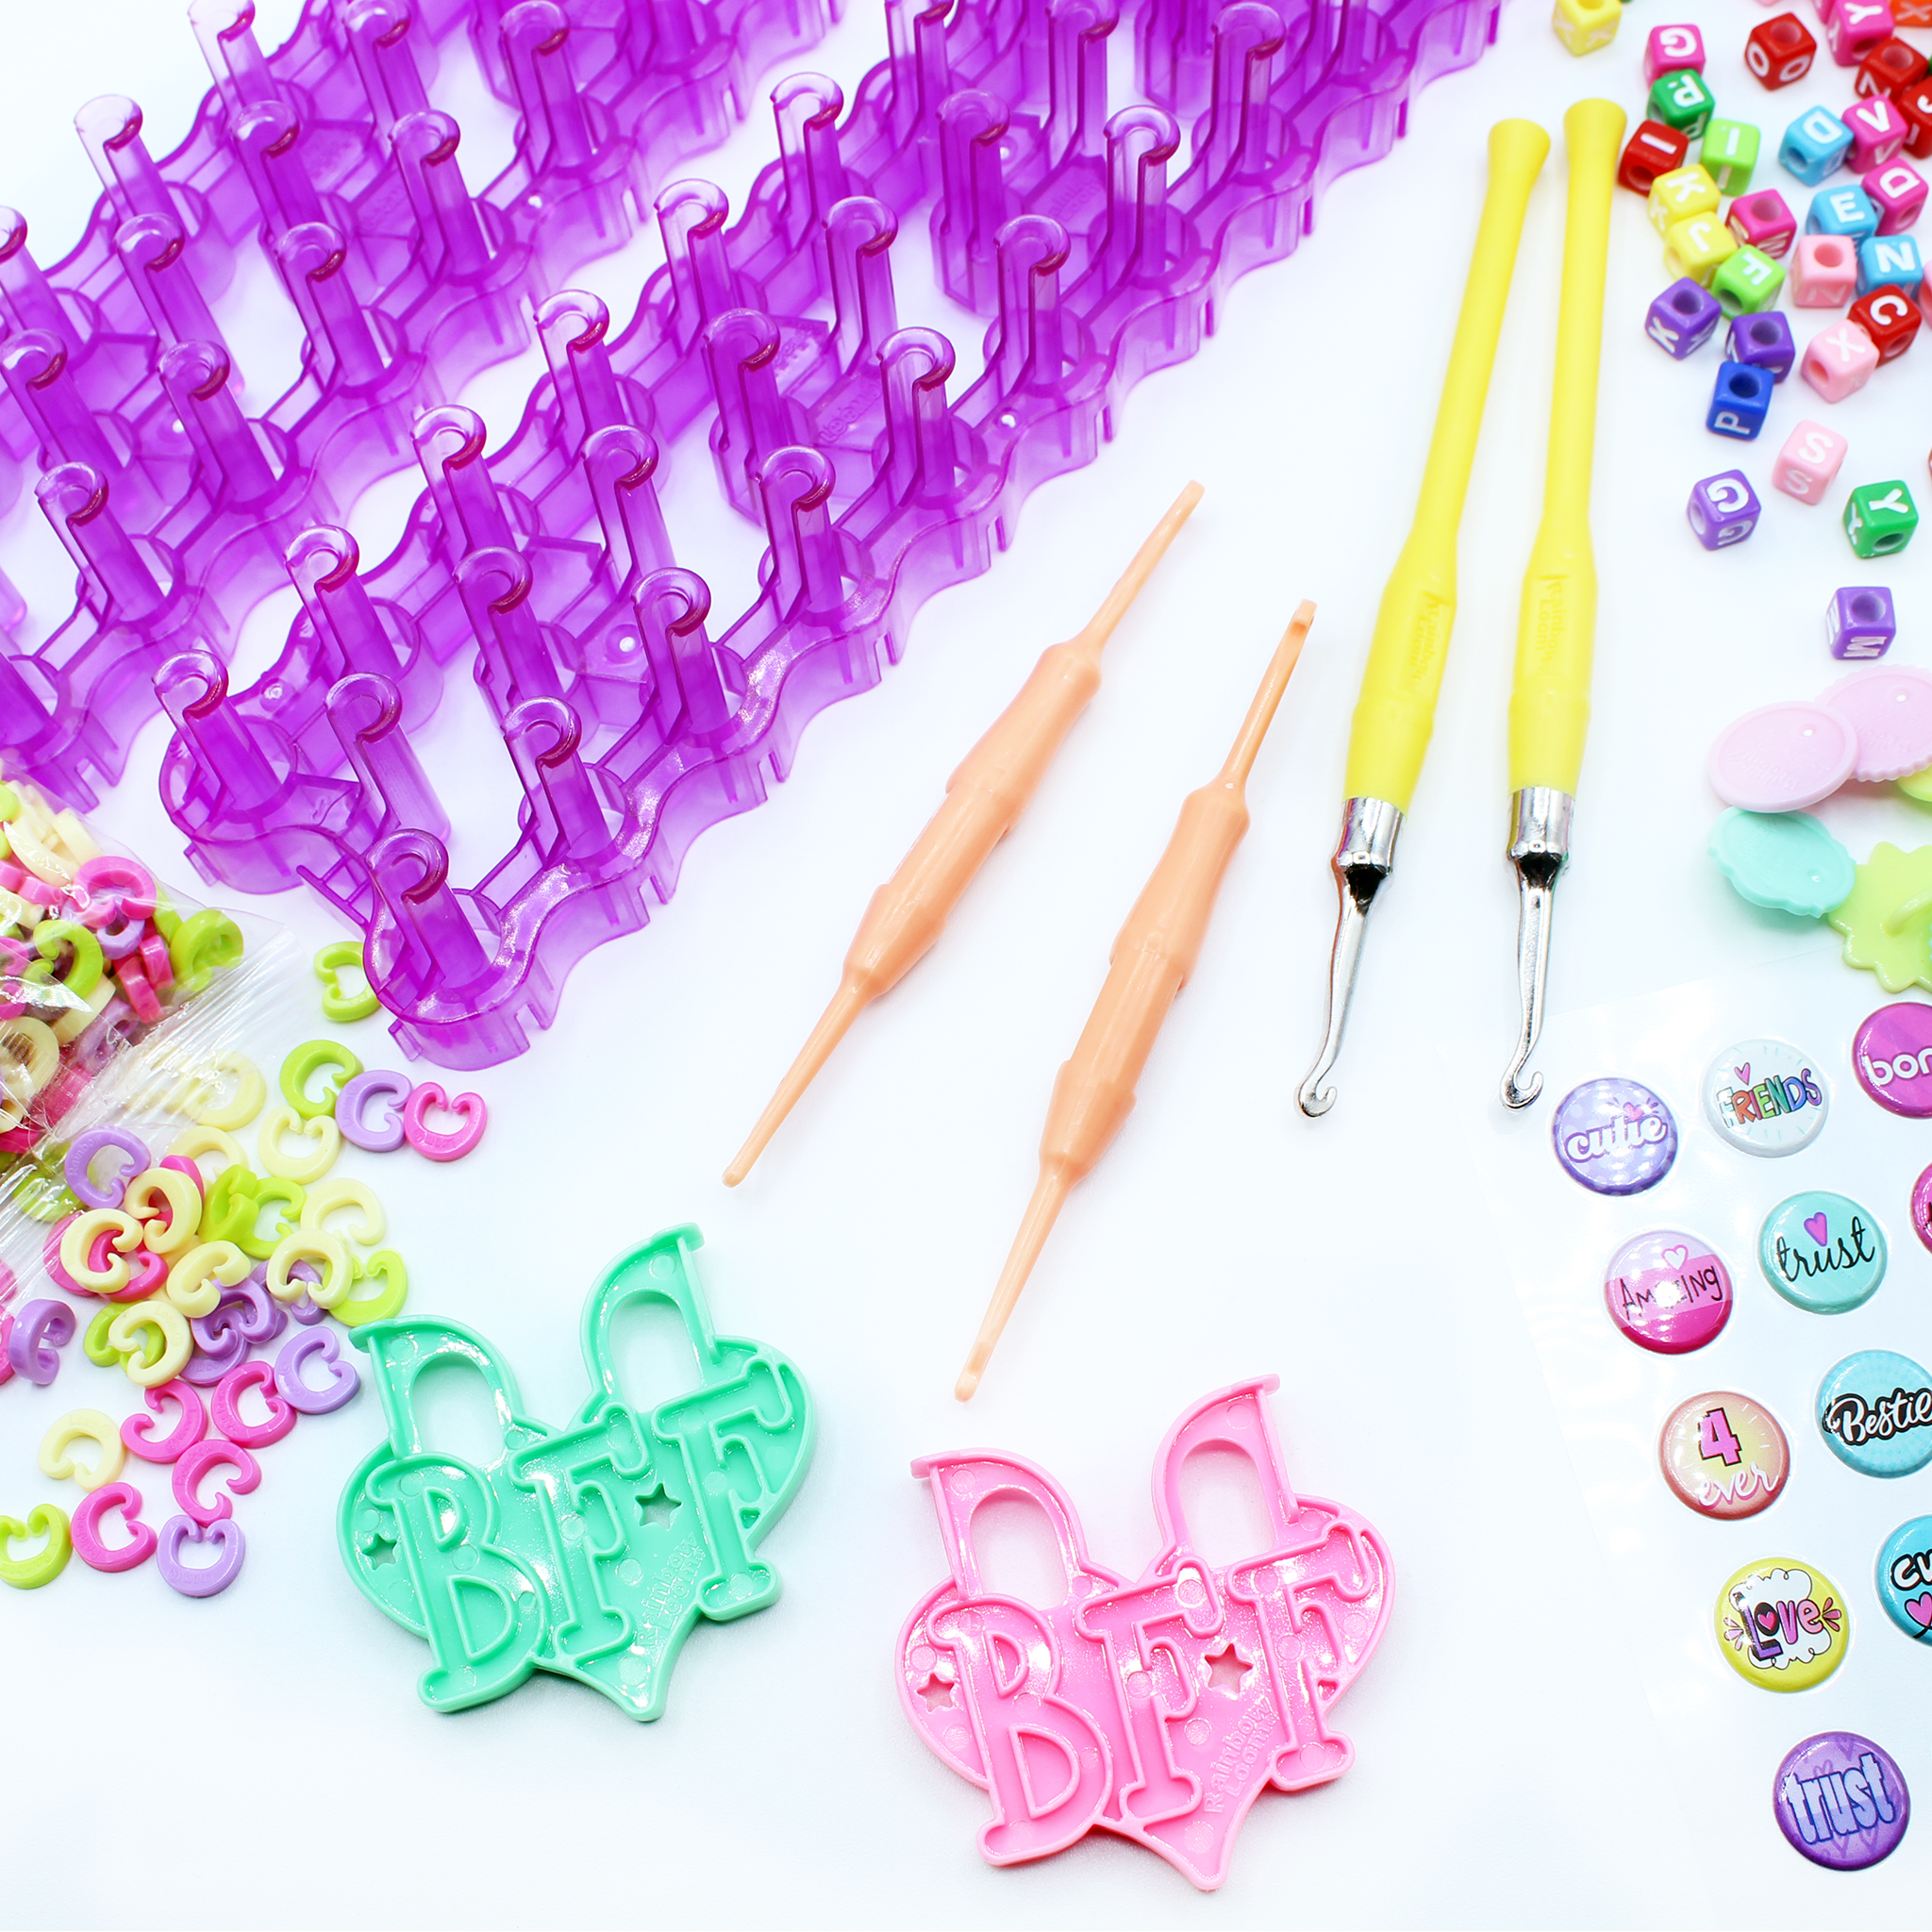 BFF Mega Combo Featuring our NEW Bracelet Buttons Unboxing by Rainbow Loom®  